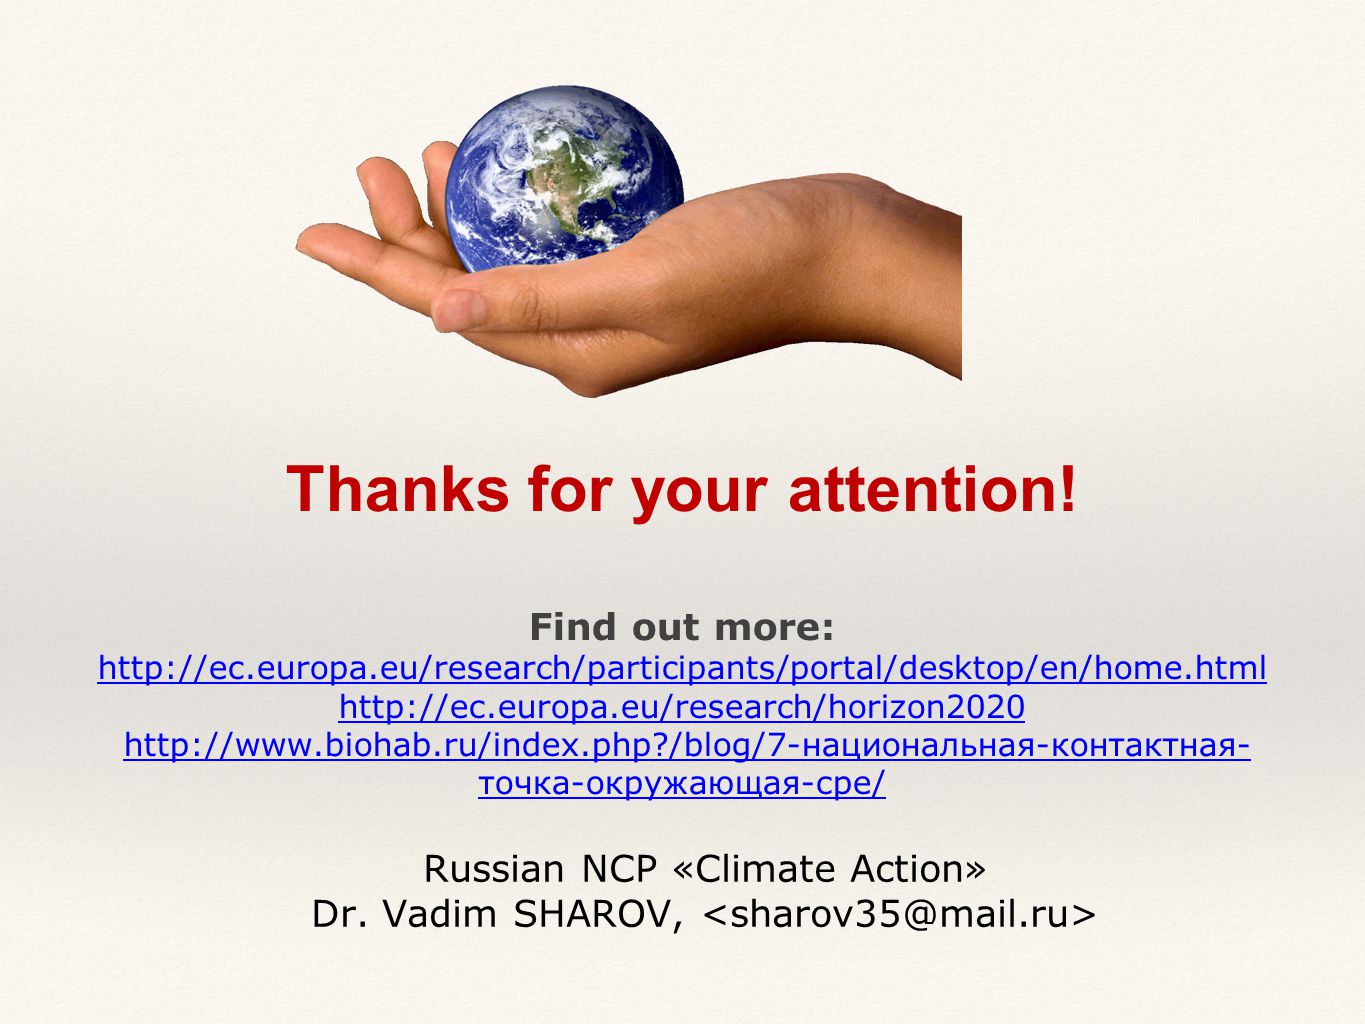 Russian NCP «Climate Action» Dr. Vadim SHAROV, Thanks for your attention.